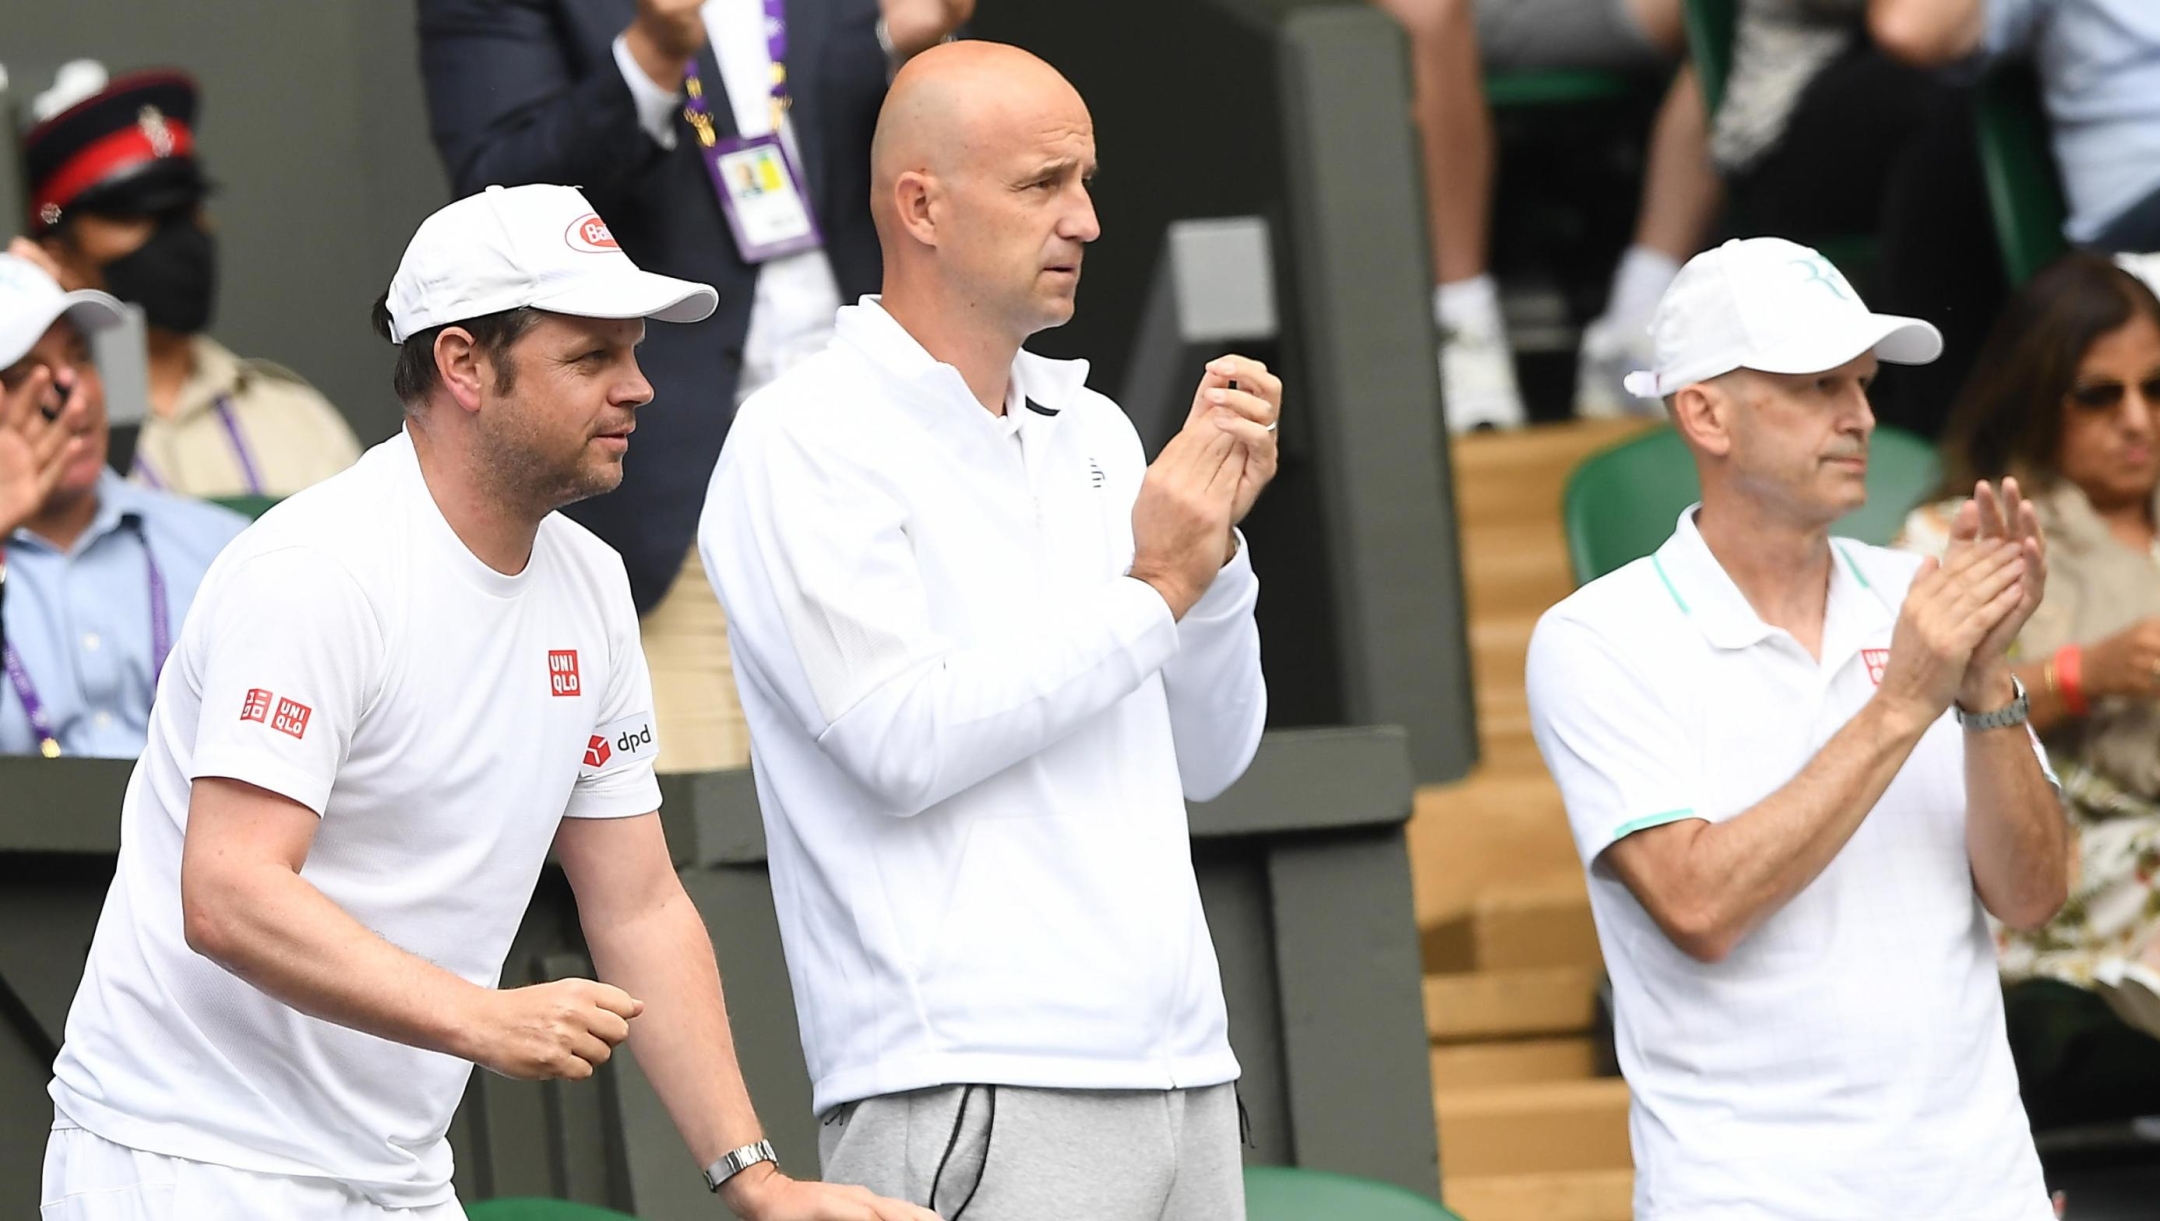 epa09316370 Roger Federer's coach Ivan Ljubicic (C) attends the second round match between Roger Federer of Switzerland and Richard Gasquet of France at the Wimbledon Championships, Wimbledon, Britain 01 July 2021.  EPA/FACUNDO ARRIZABALAGA   EDITORIAL USE ONLY    EDITORIAL USE ONLY  EDITORIAL USE ONLY